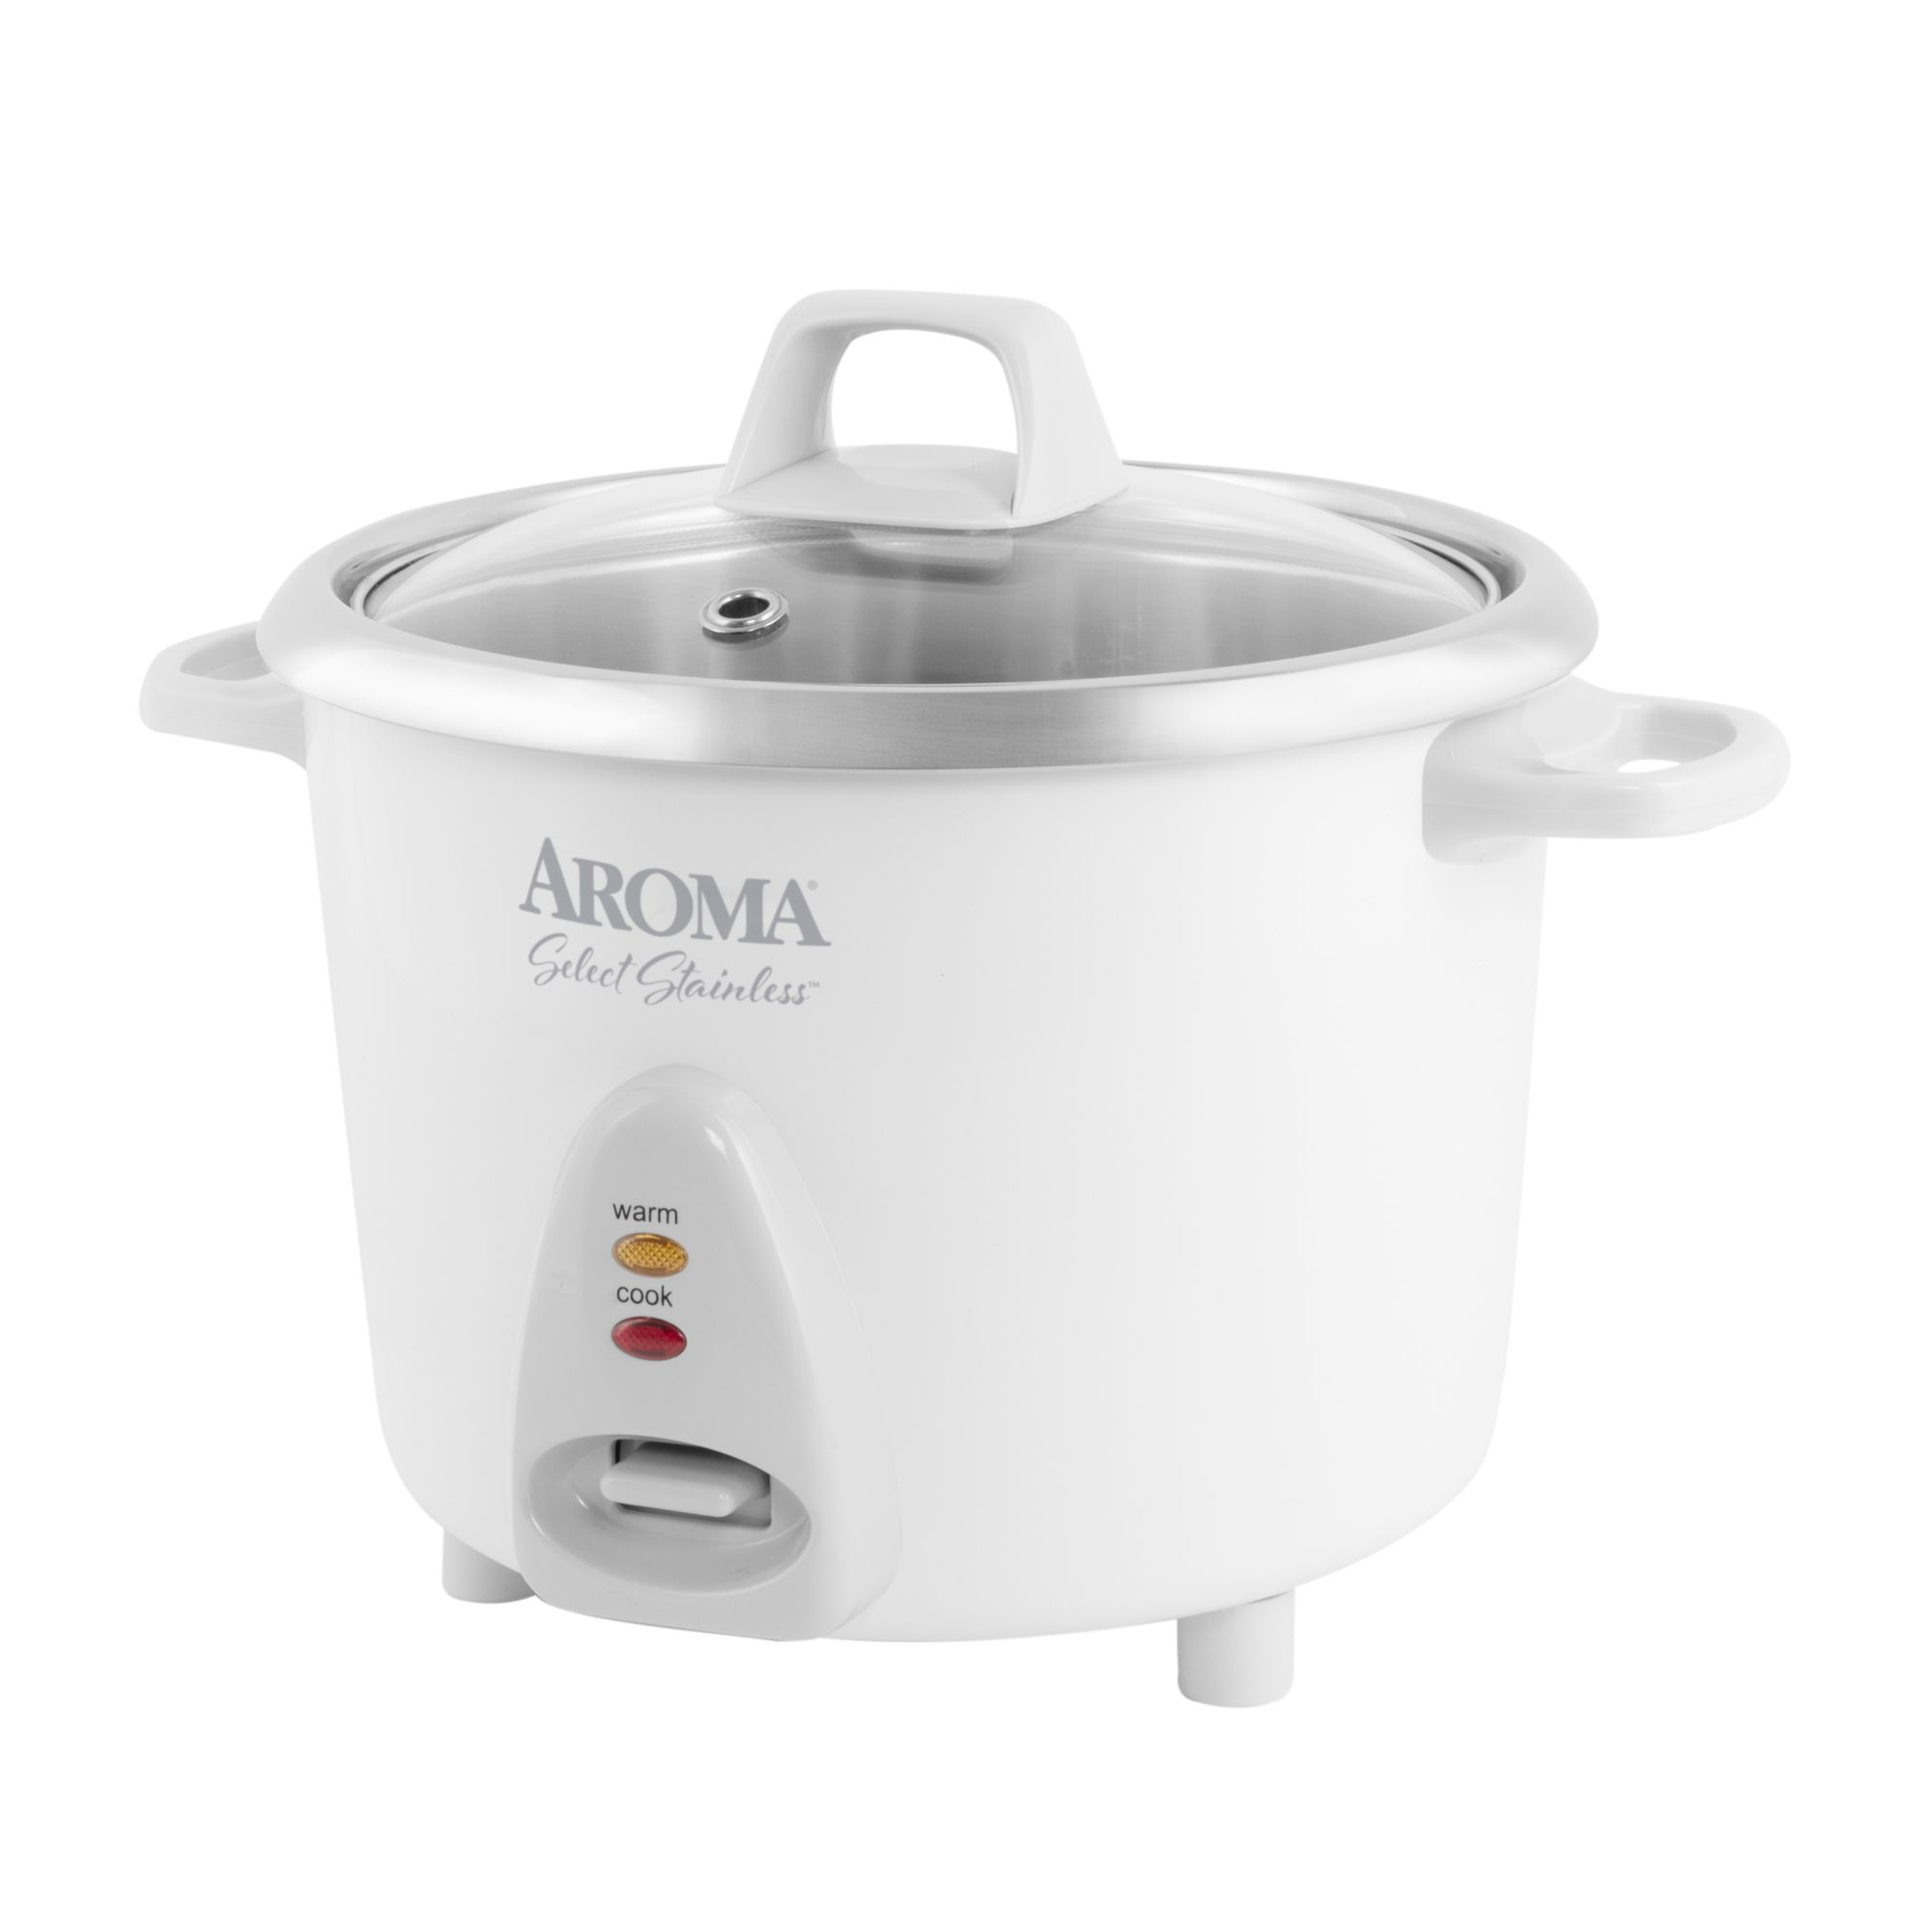 AROMA 14-Cup Cooked 3 Qt. Select Rice Grain Cooker ARC-757SG